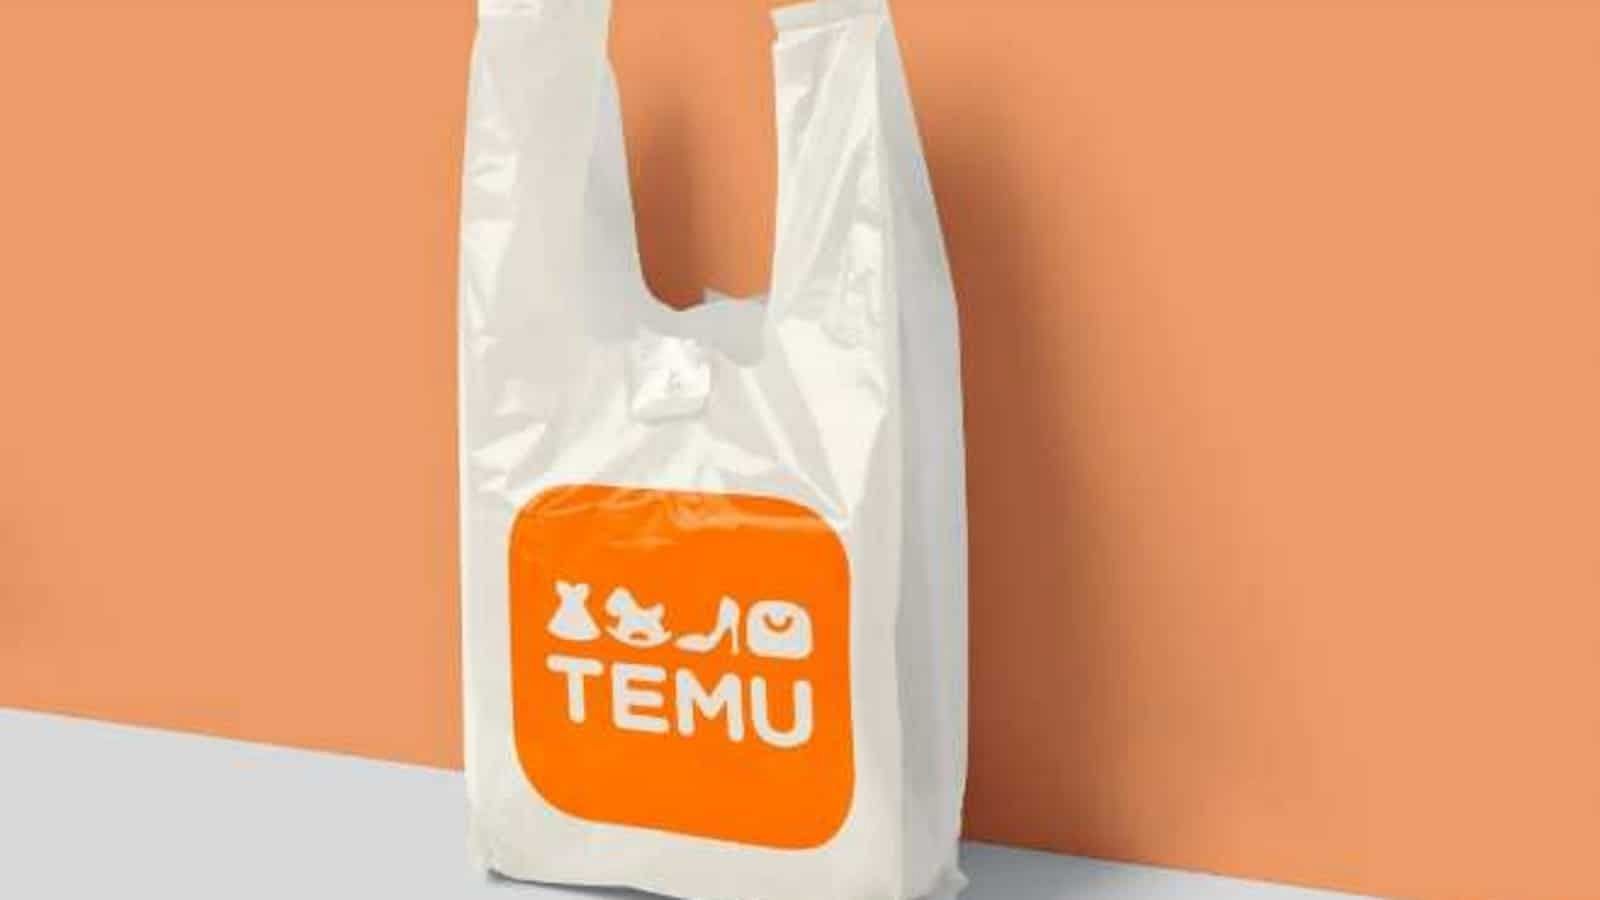 Temu, the popular ecommerce website spiked speculations as many doubted if it is legit. (Image via Temu)